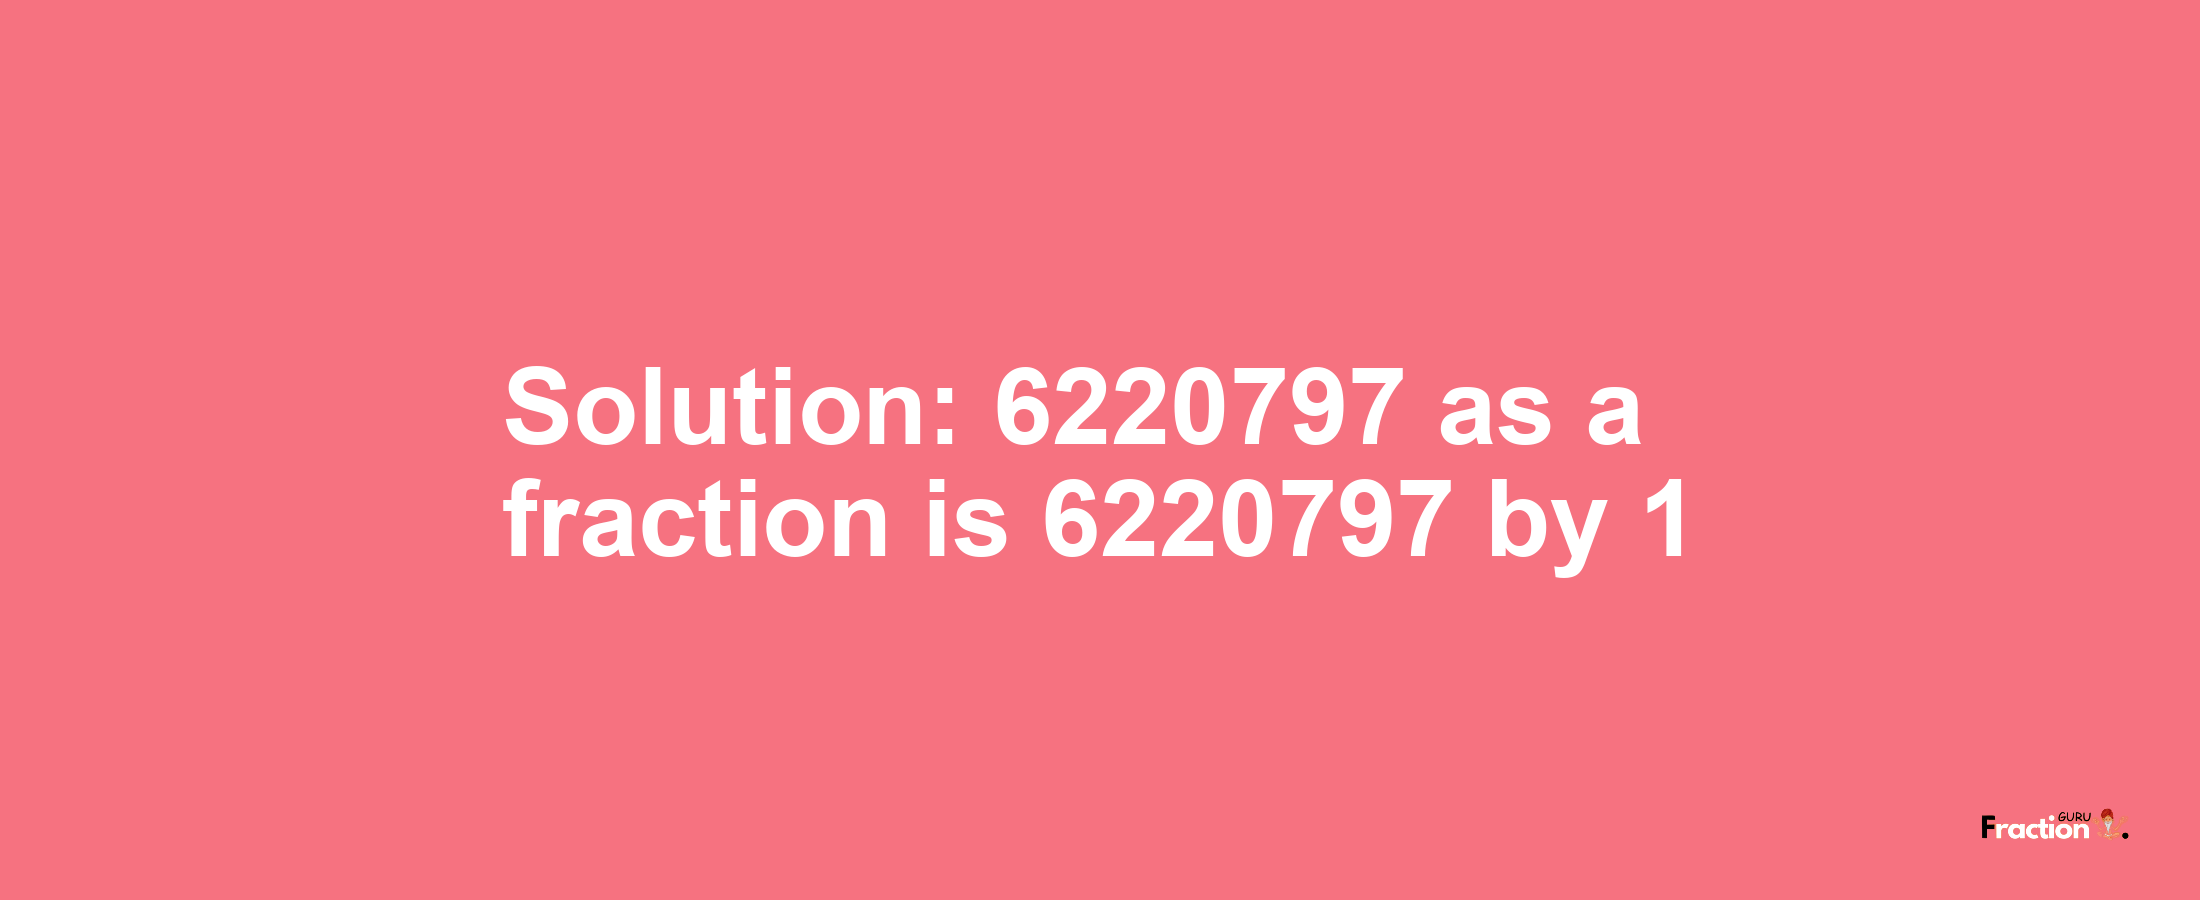 Solution:6220797 as a fraction is 6220797/1